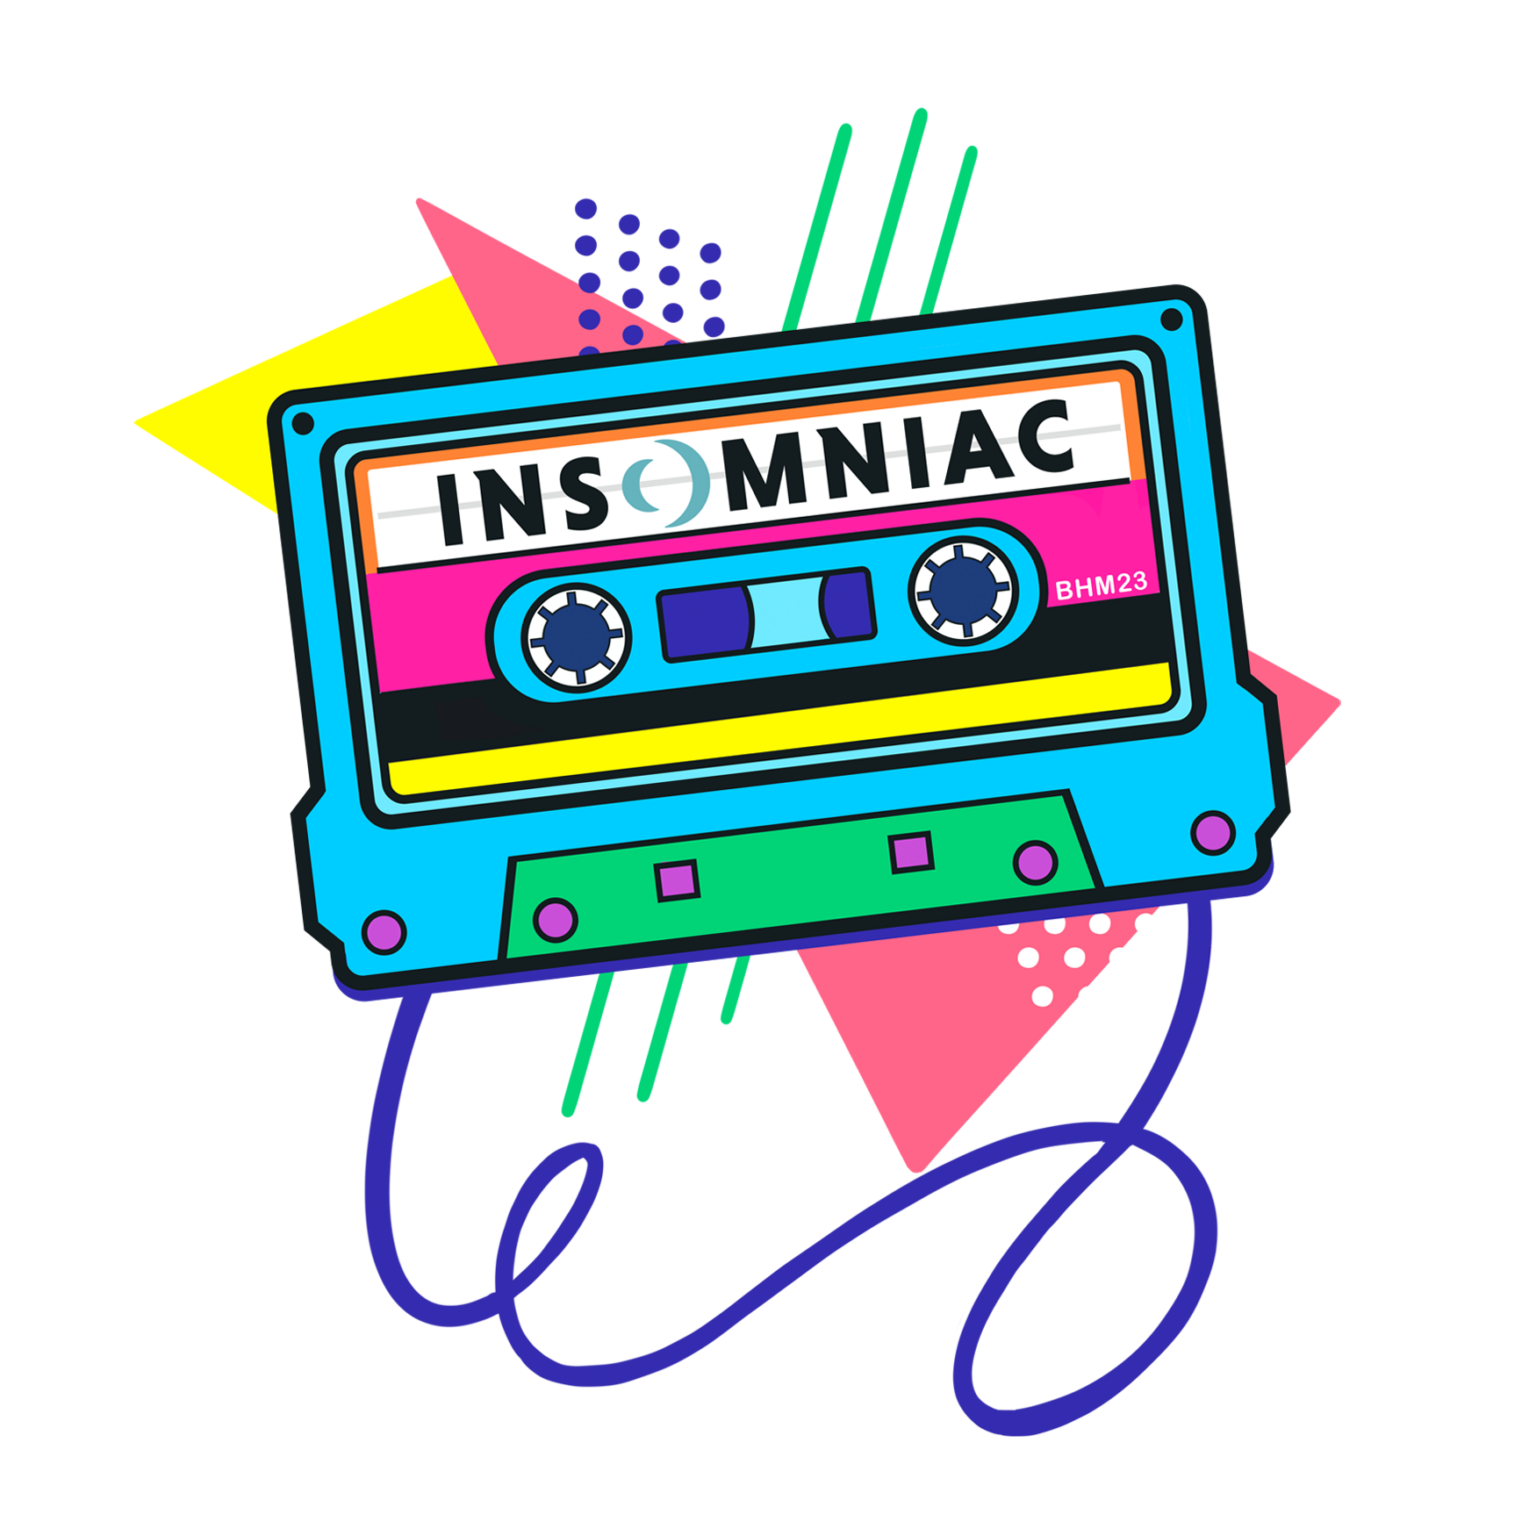 Cassette Tape featuring a '90s design. It reads "Insomniac" on it.